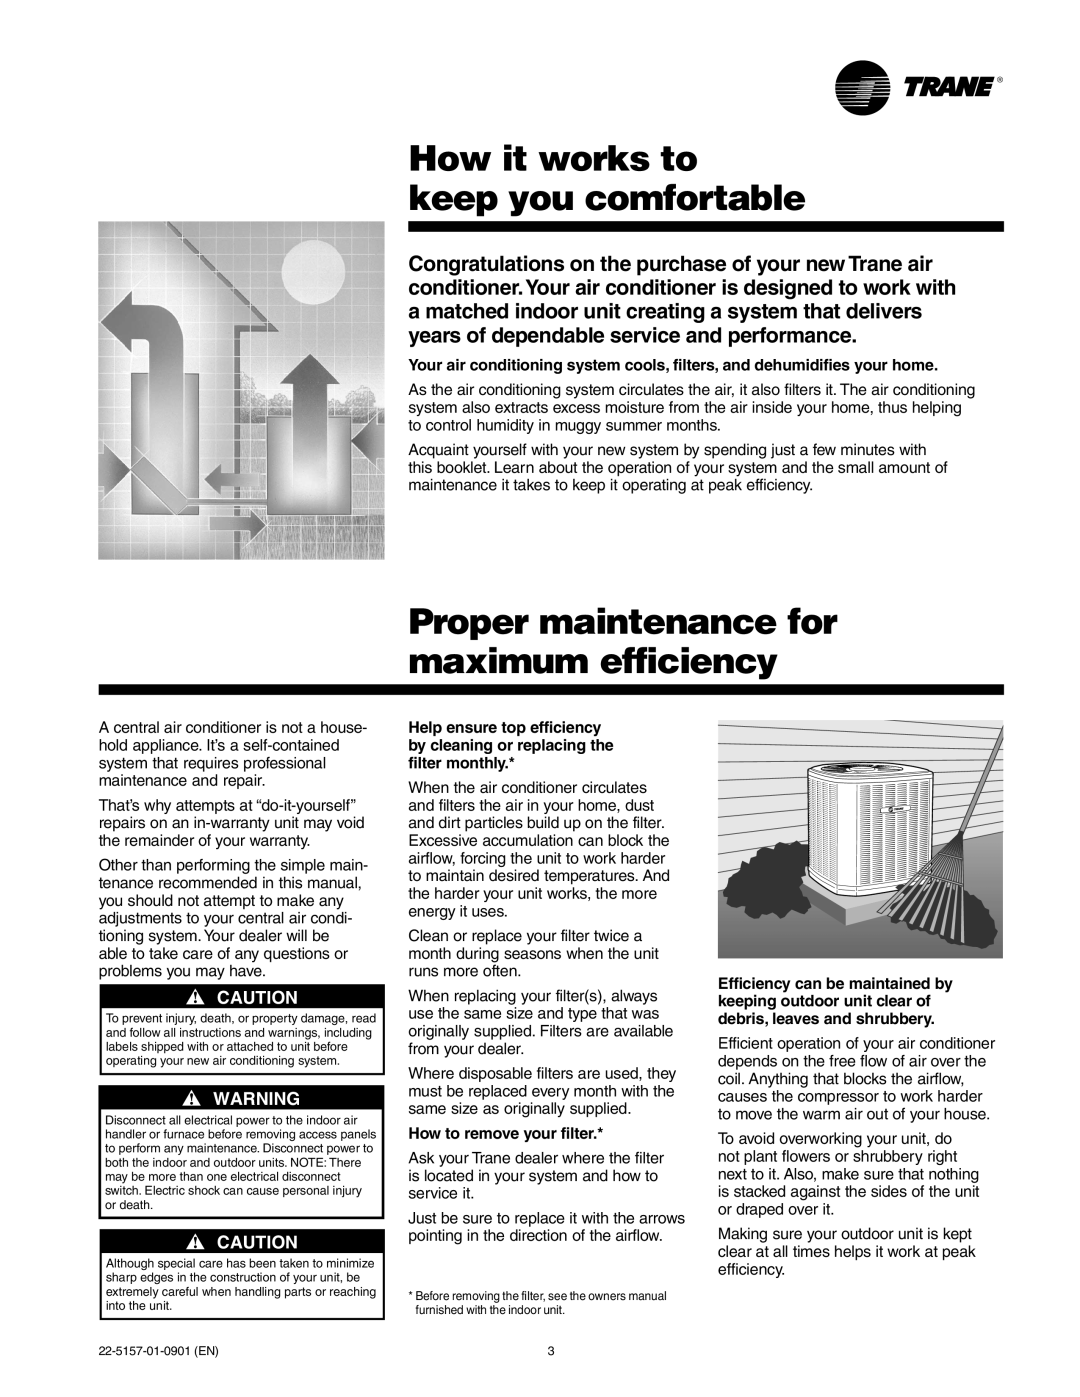 Trane Central Air Conditioning manual How it works to keep you comfortable, Proper maintenance for maximum efficiency 